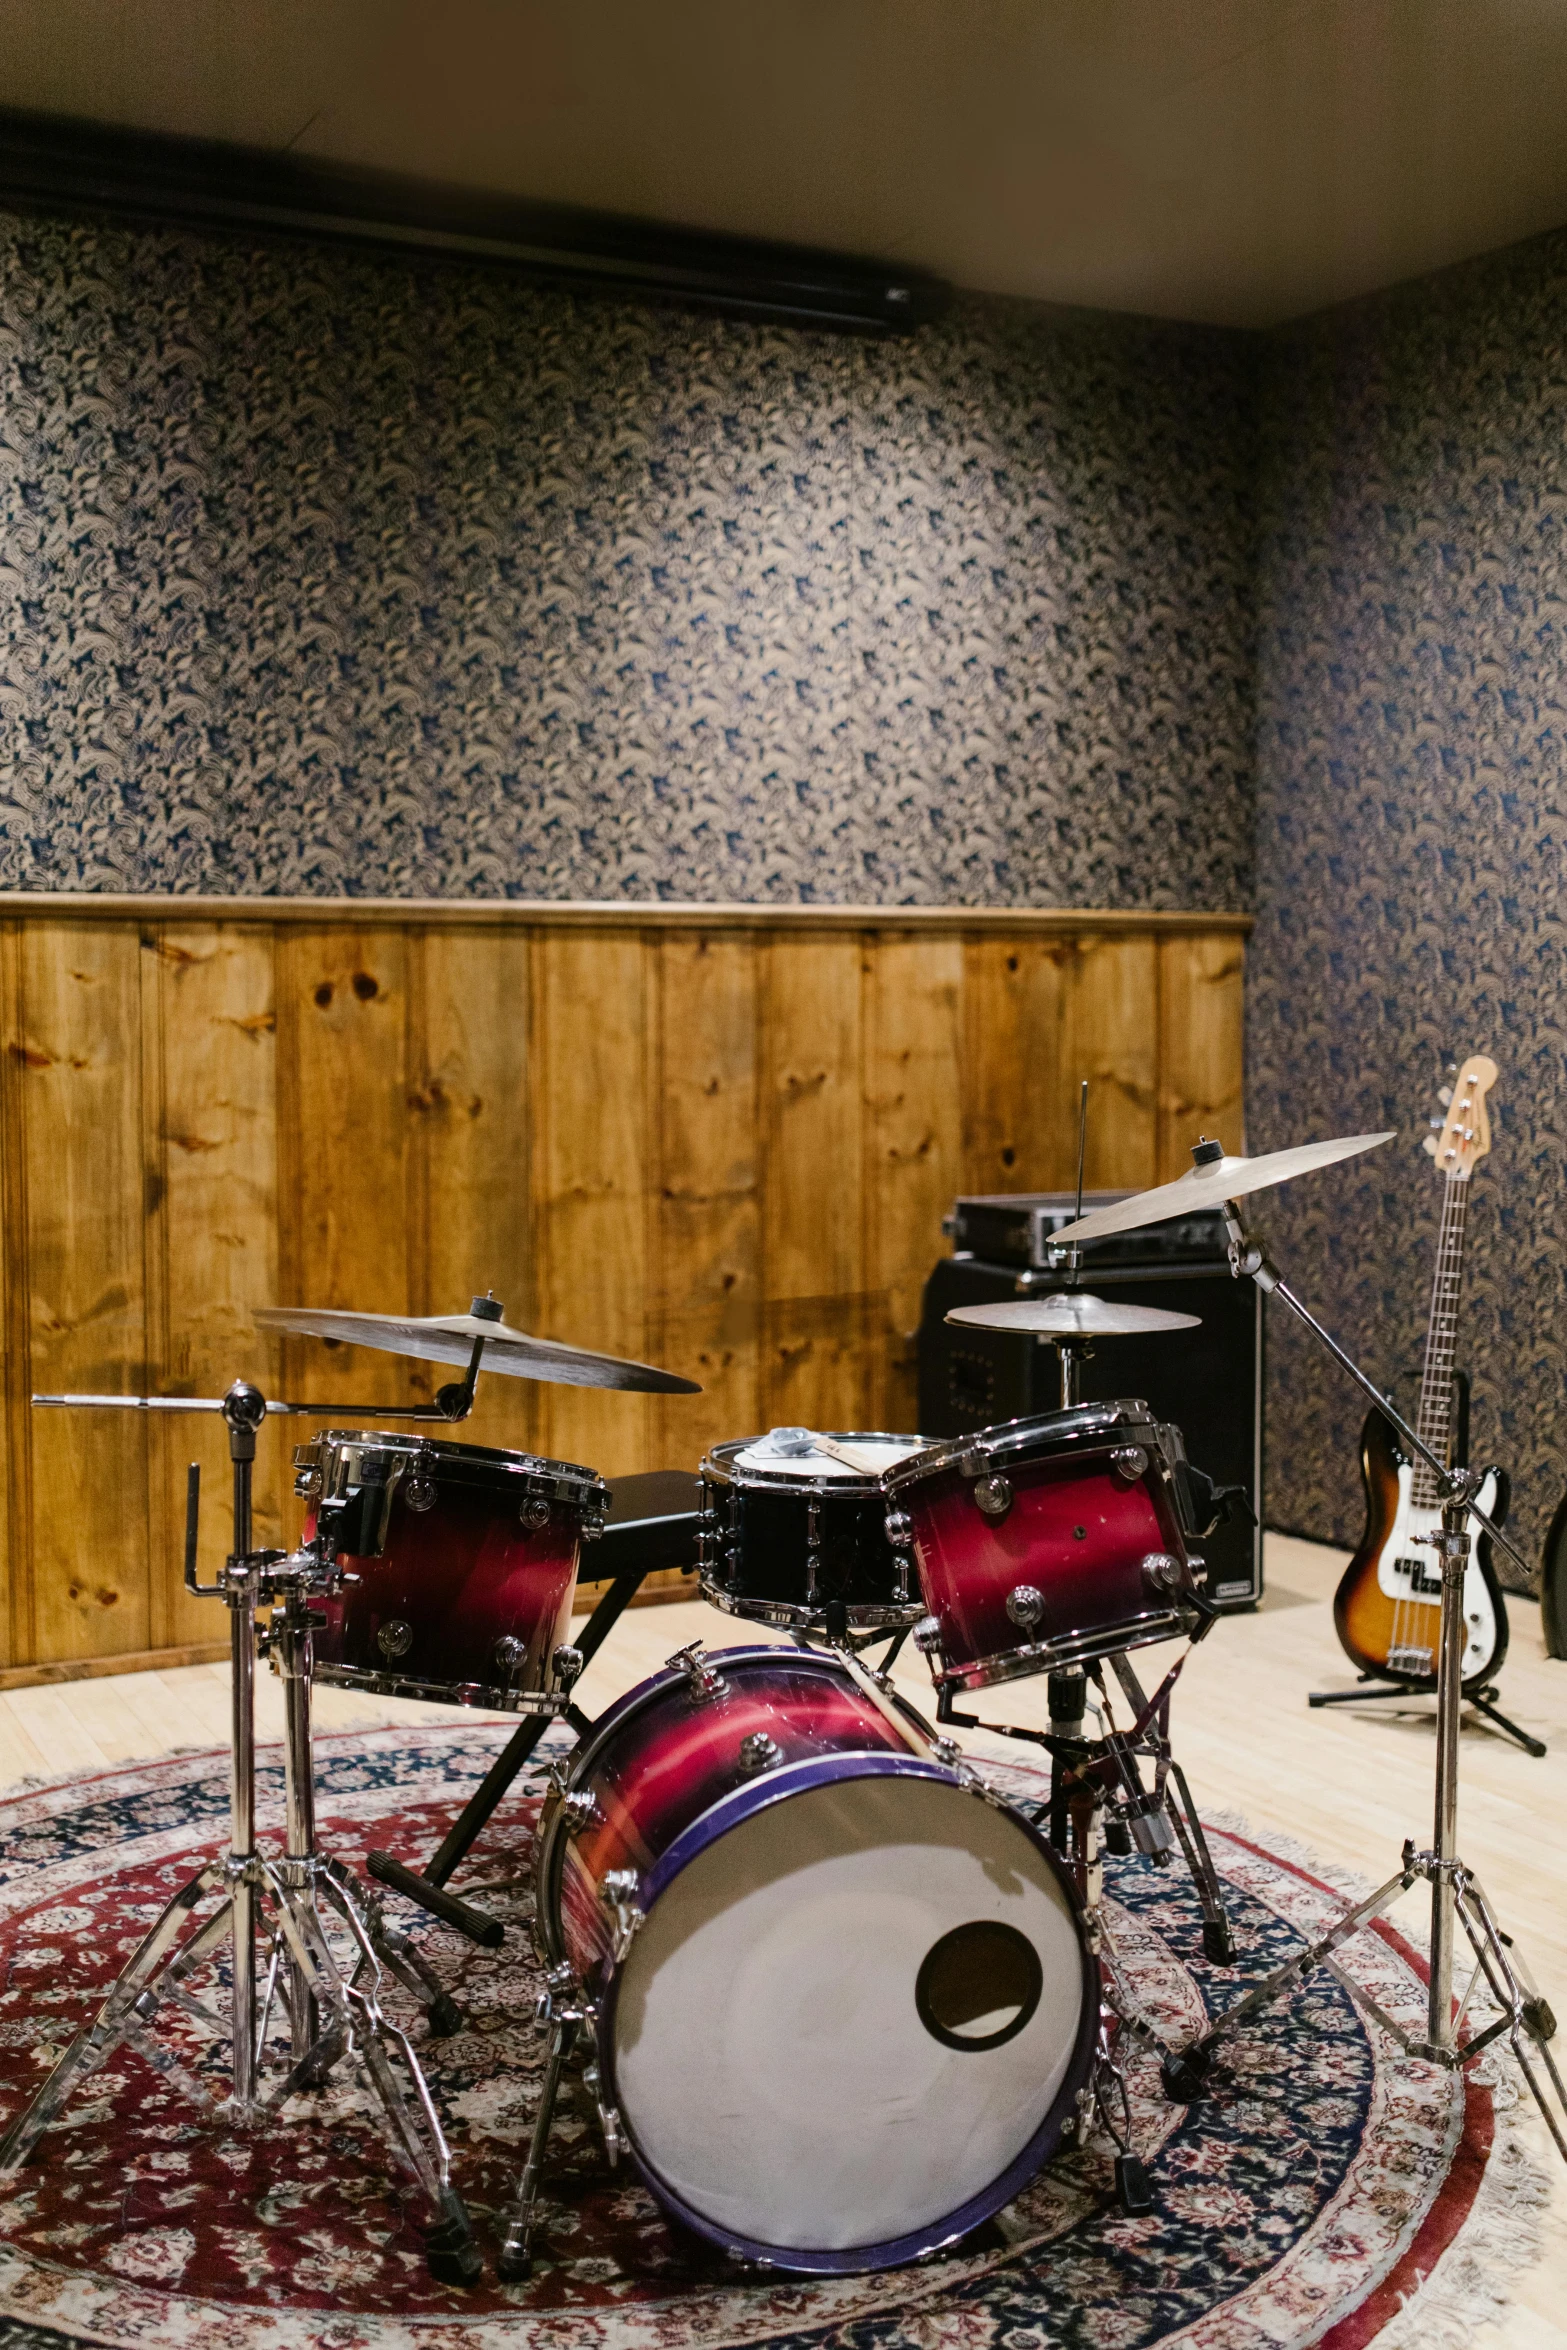 a drum kit sitting on top of a rug in a room, studio bind, panoramic, back rooms, promo image